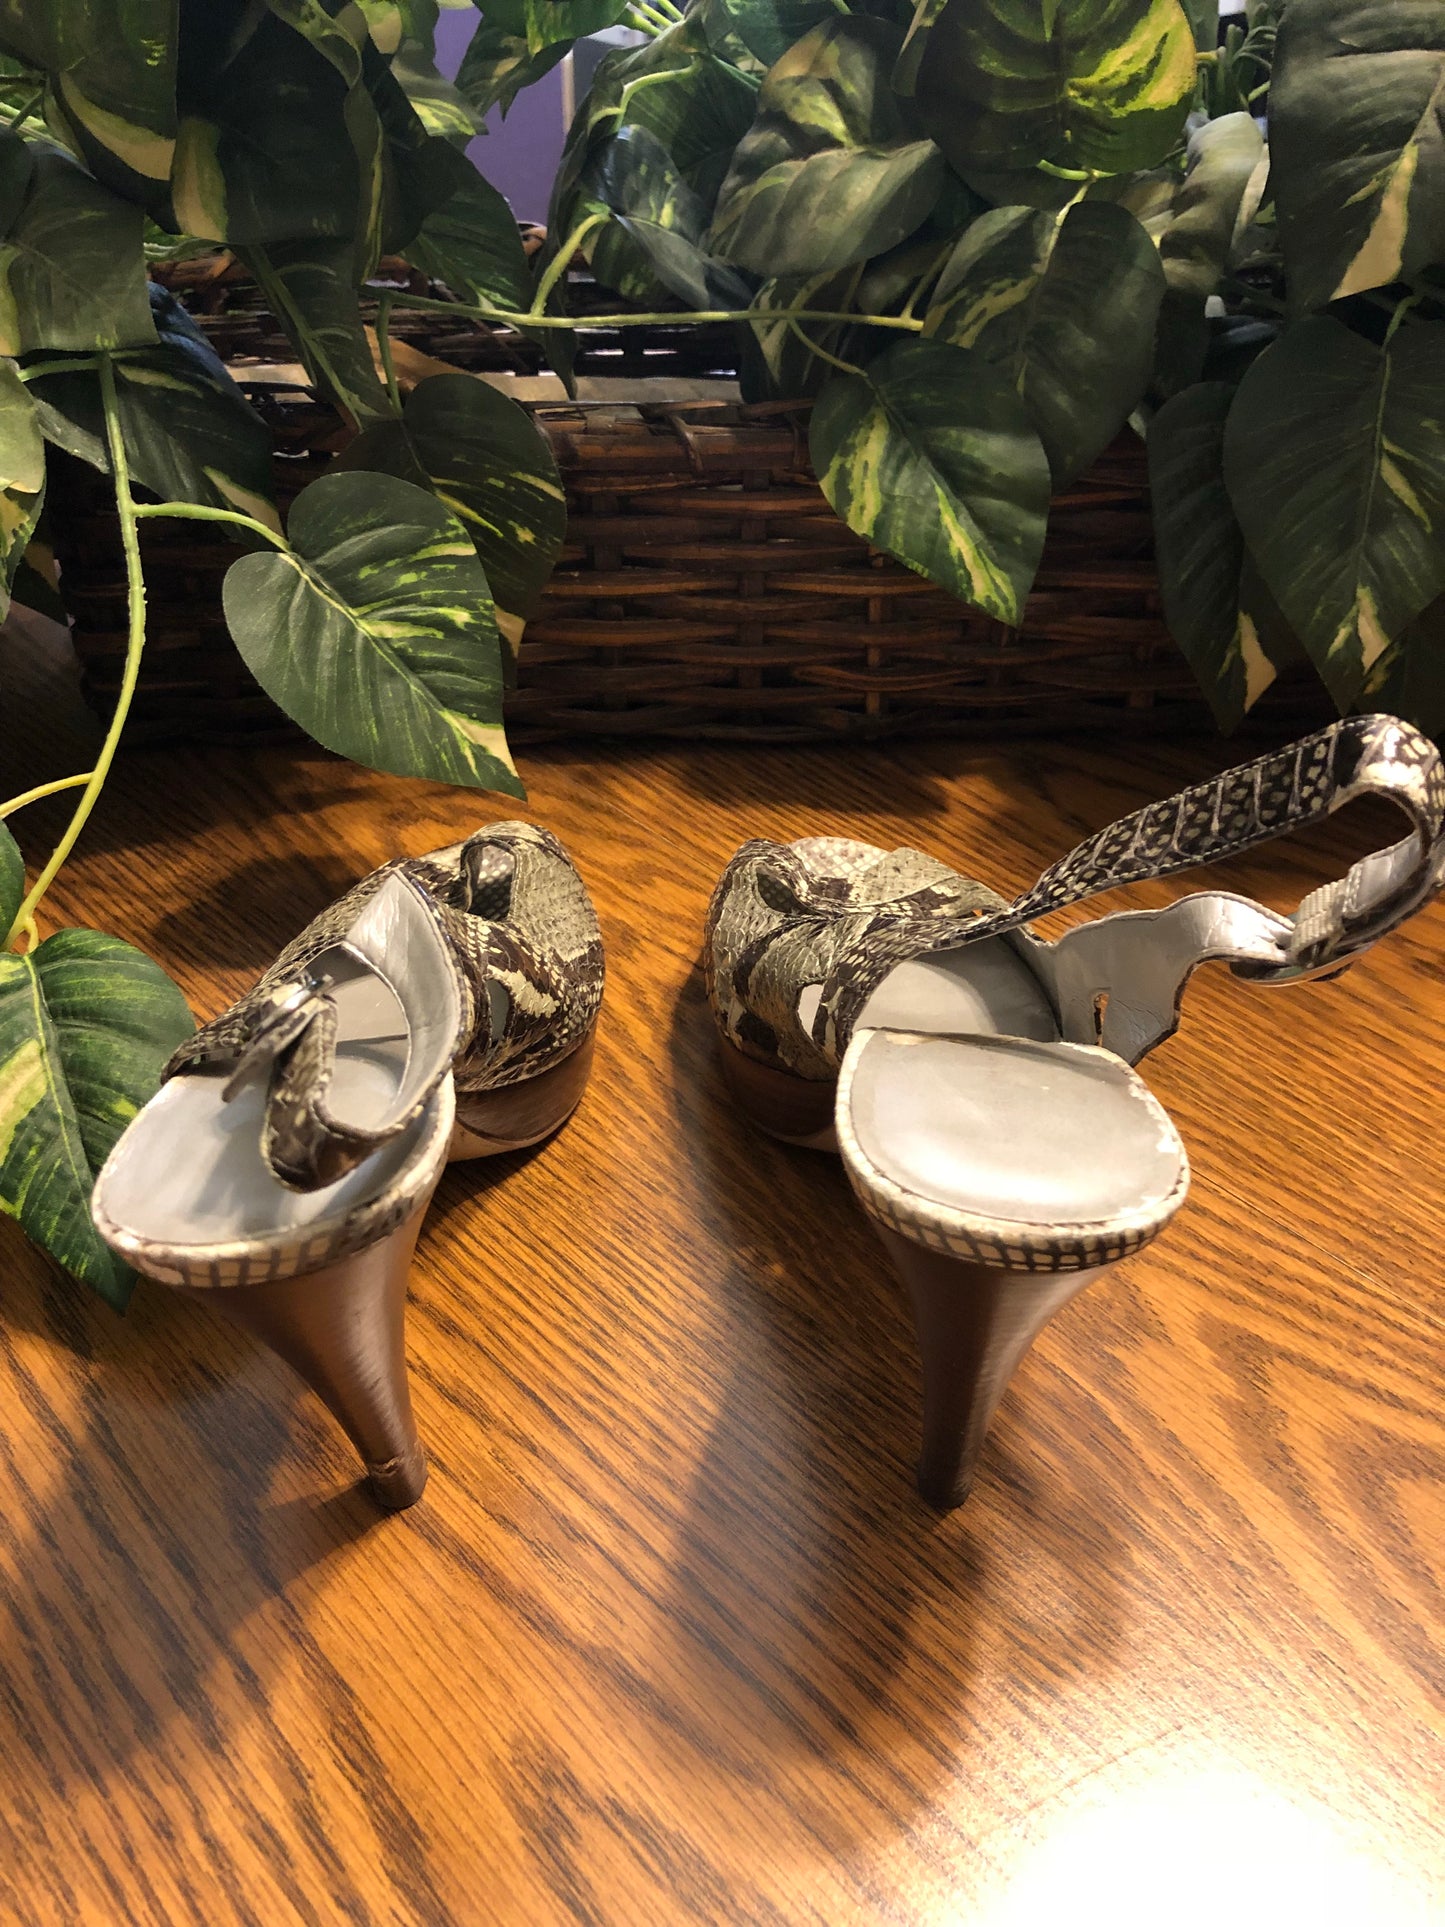 Marc Fisher 4-Inch Strap Heels, US Size 8.5 - Used